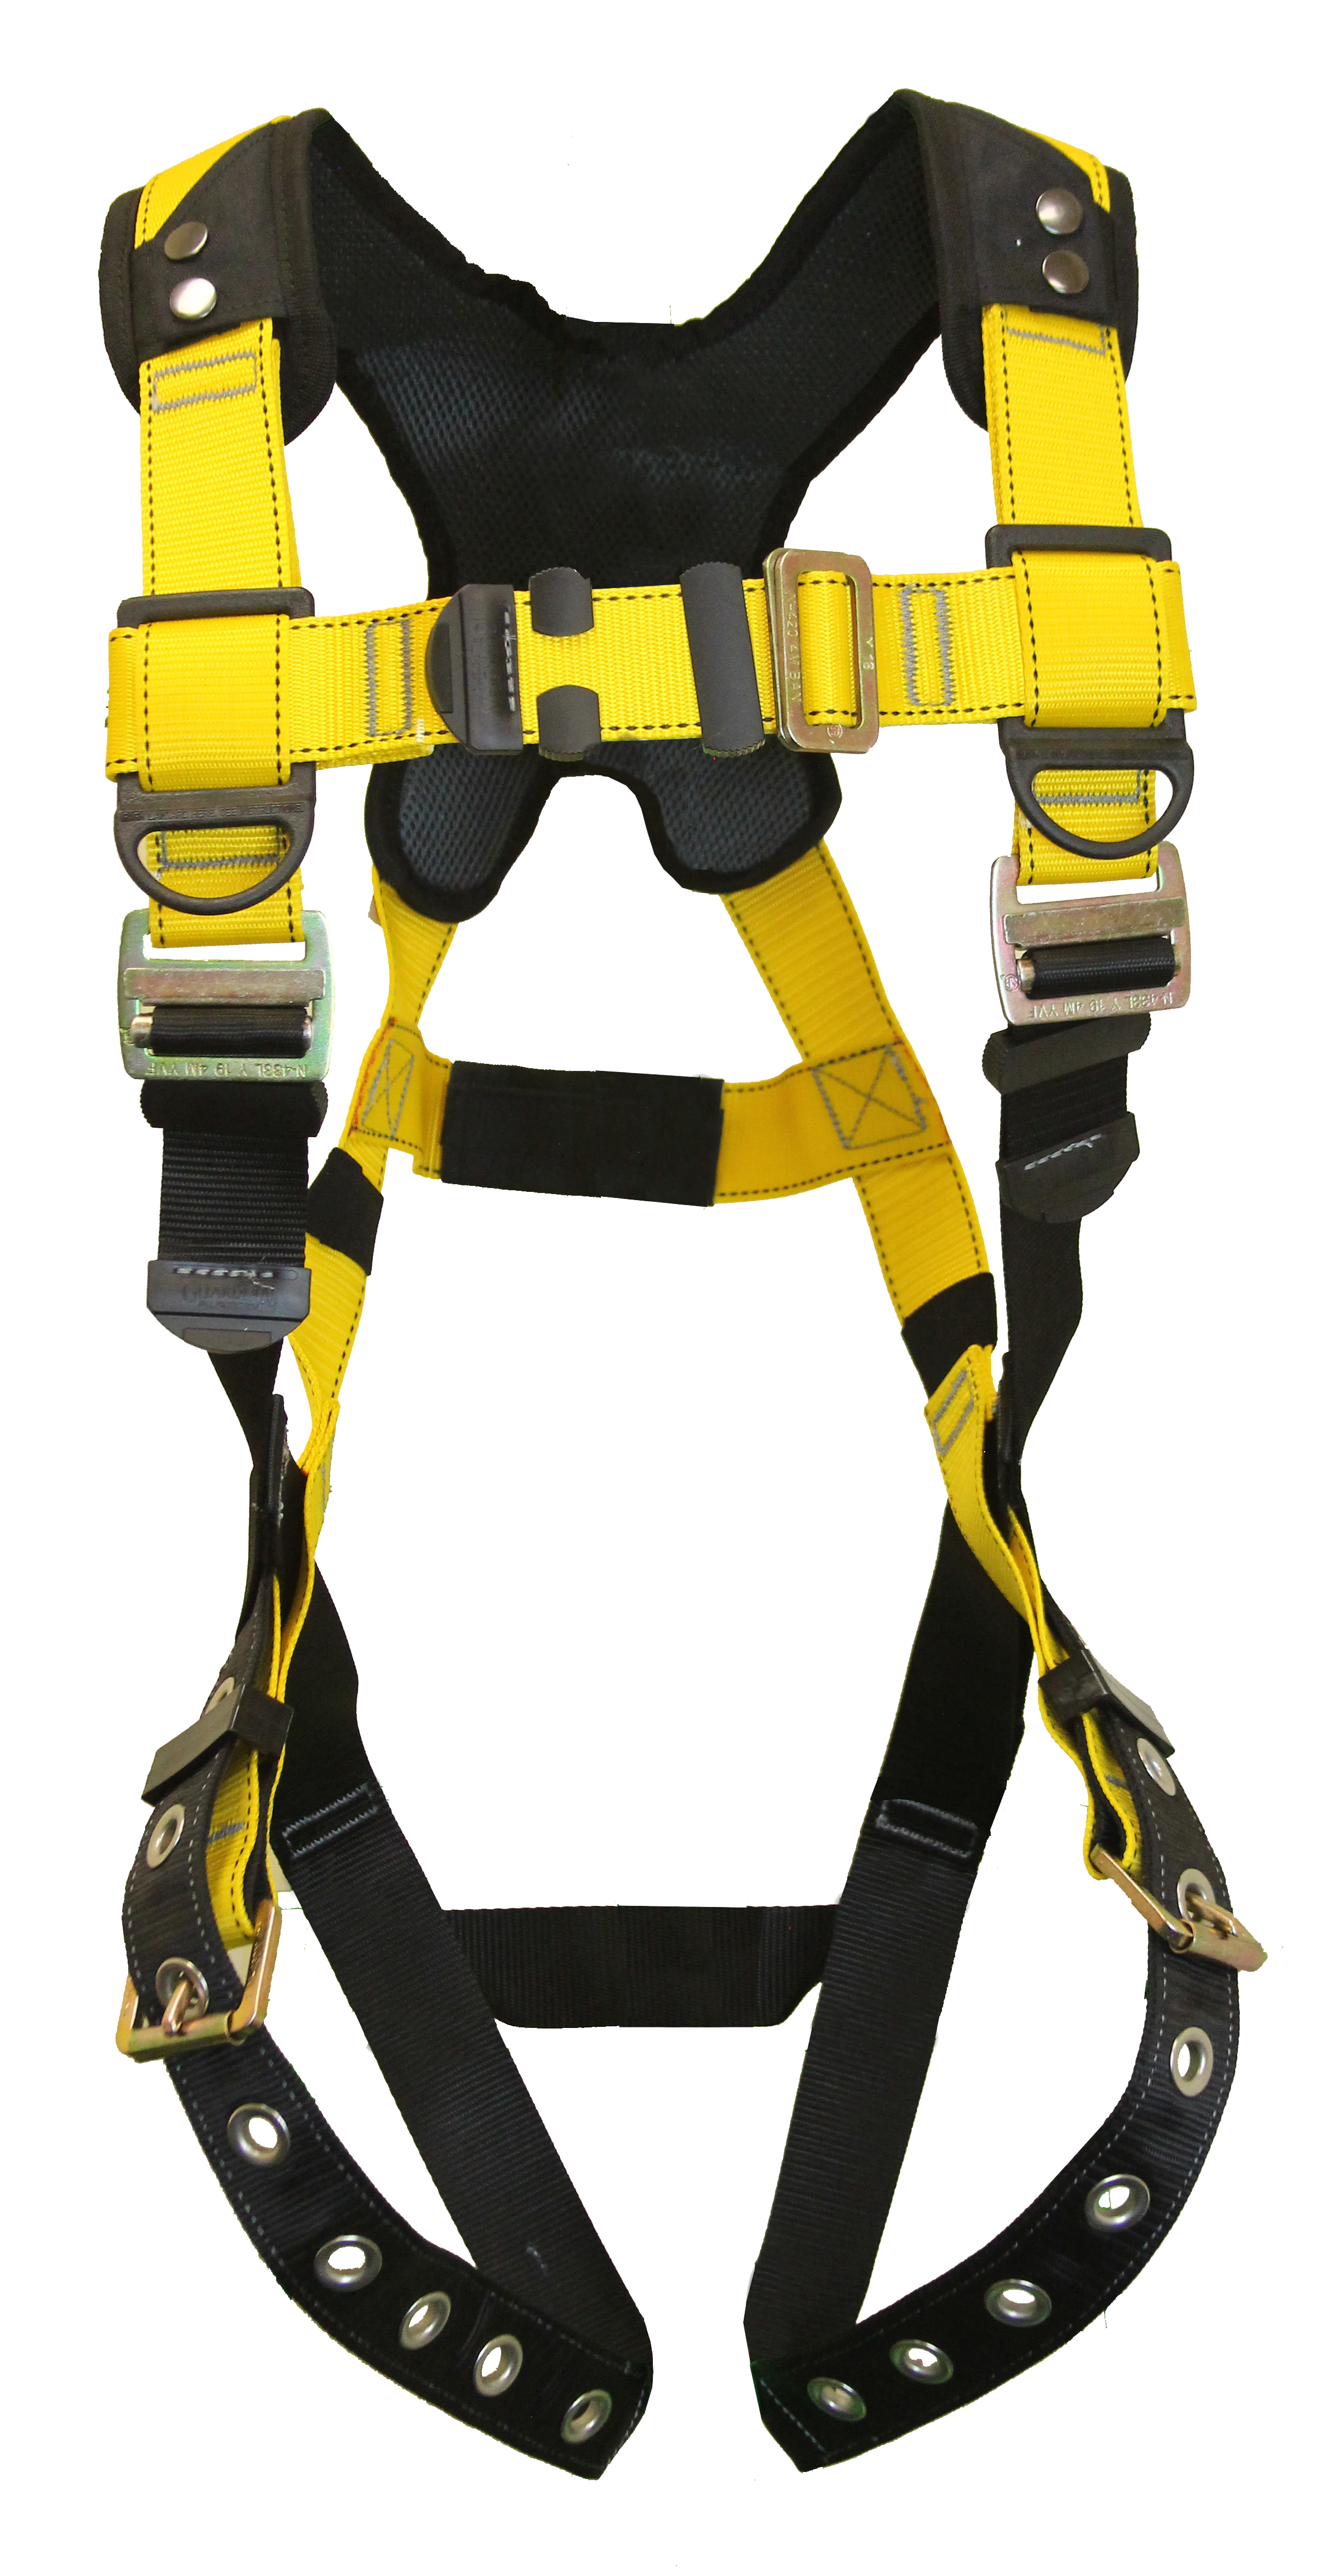 Guardian Fall Protection 181122 Basic HUV Premium Edge Series Harness with Pass-Thru Chest Buckles and Leg Tongue Buckles Black/Yellow XXL 